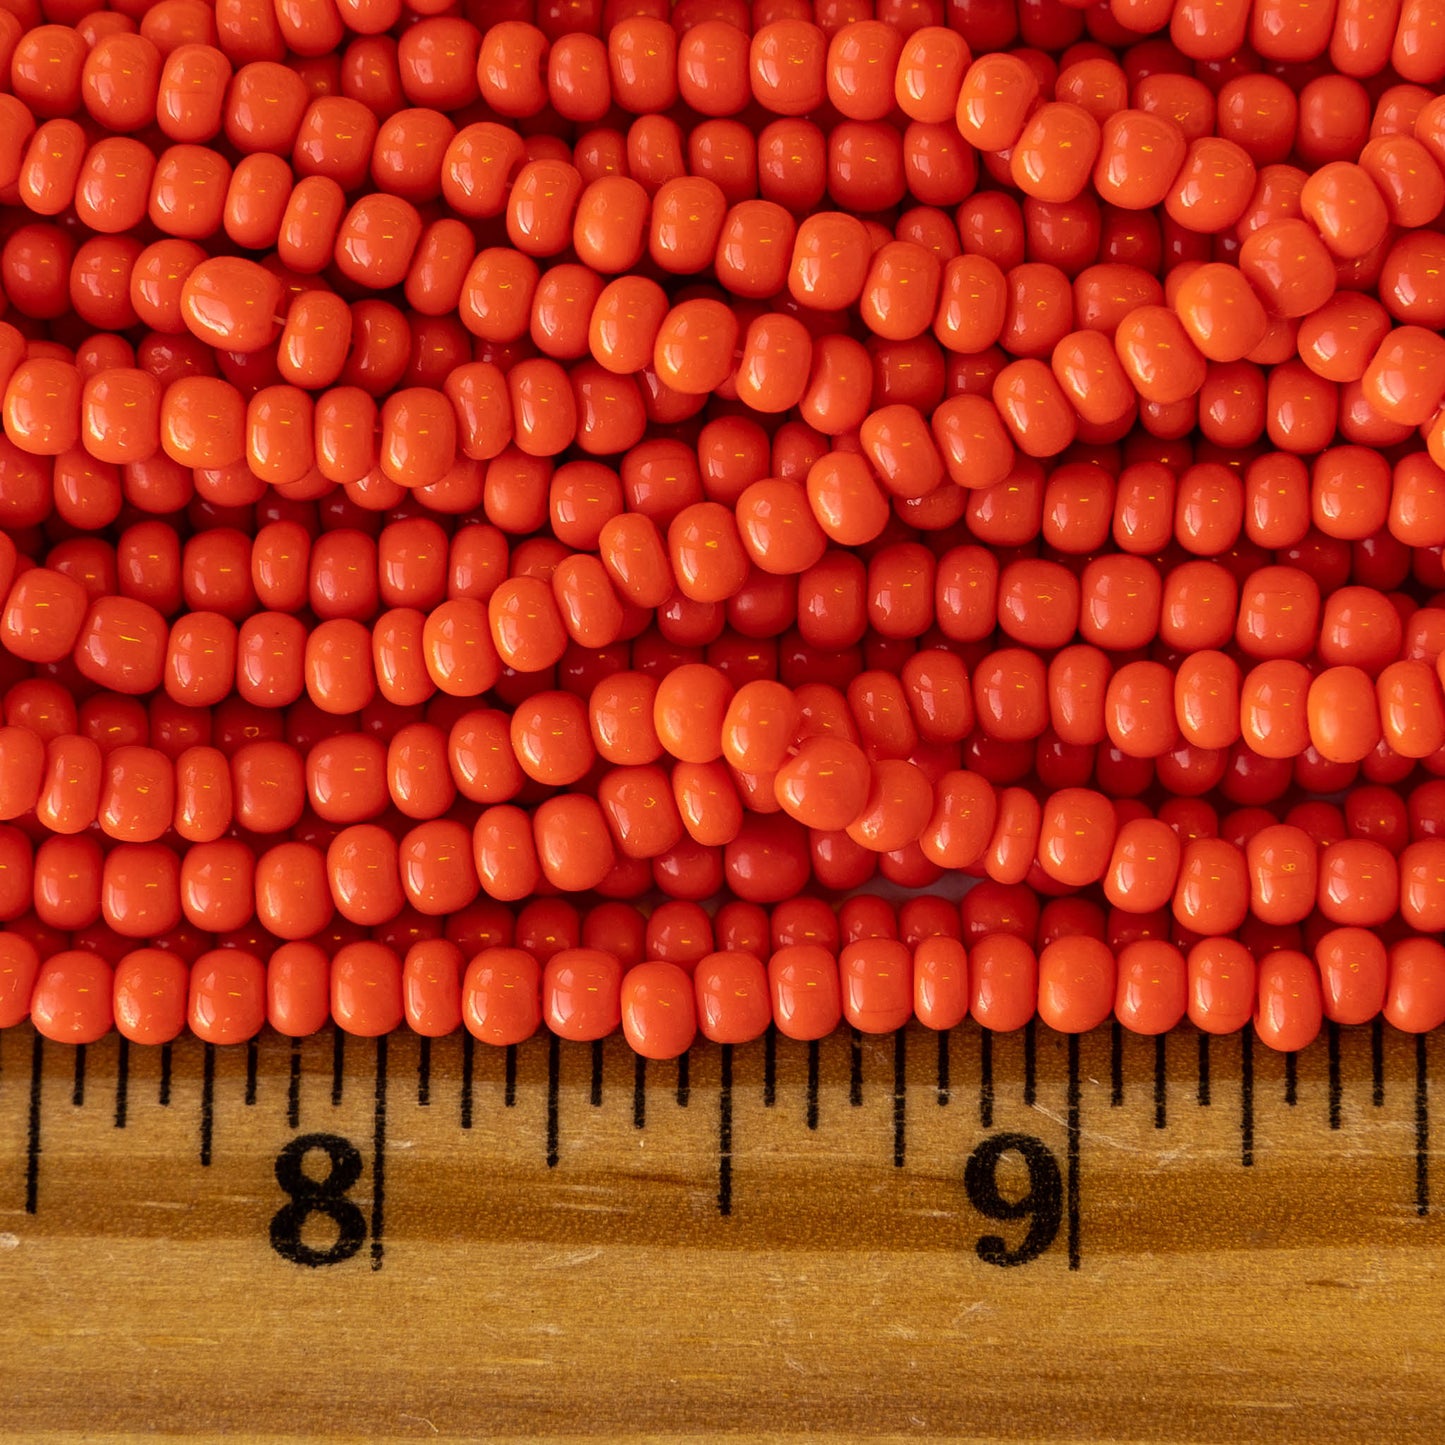 Load image into Gallery viewer, Size 6 Seed Beads - Opaque Coral Red - Choose Amount
